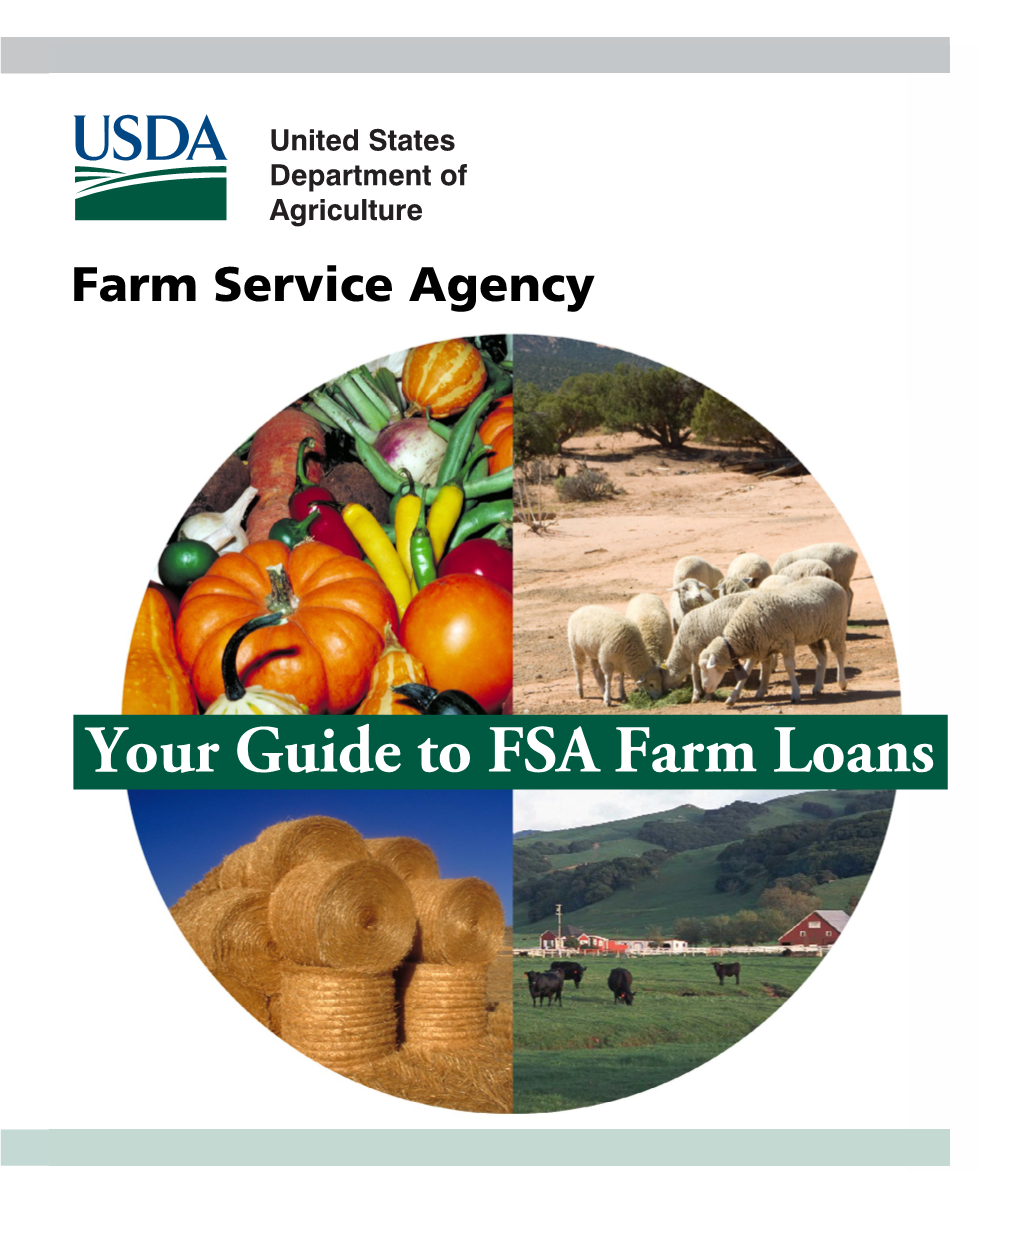 Your Guide to FSA Farm Loans Information Requested in the Form